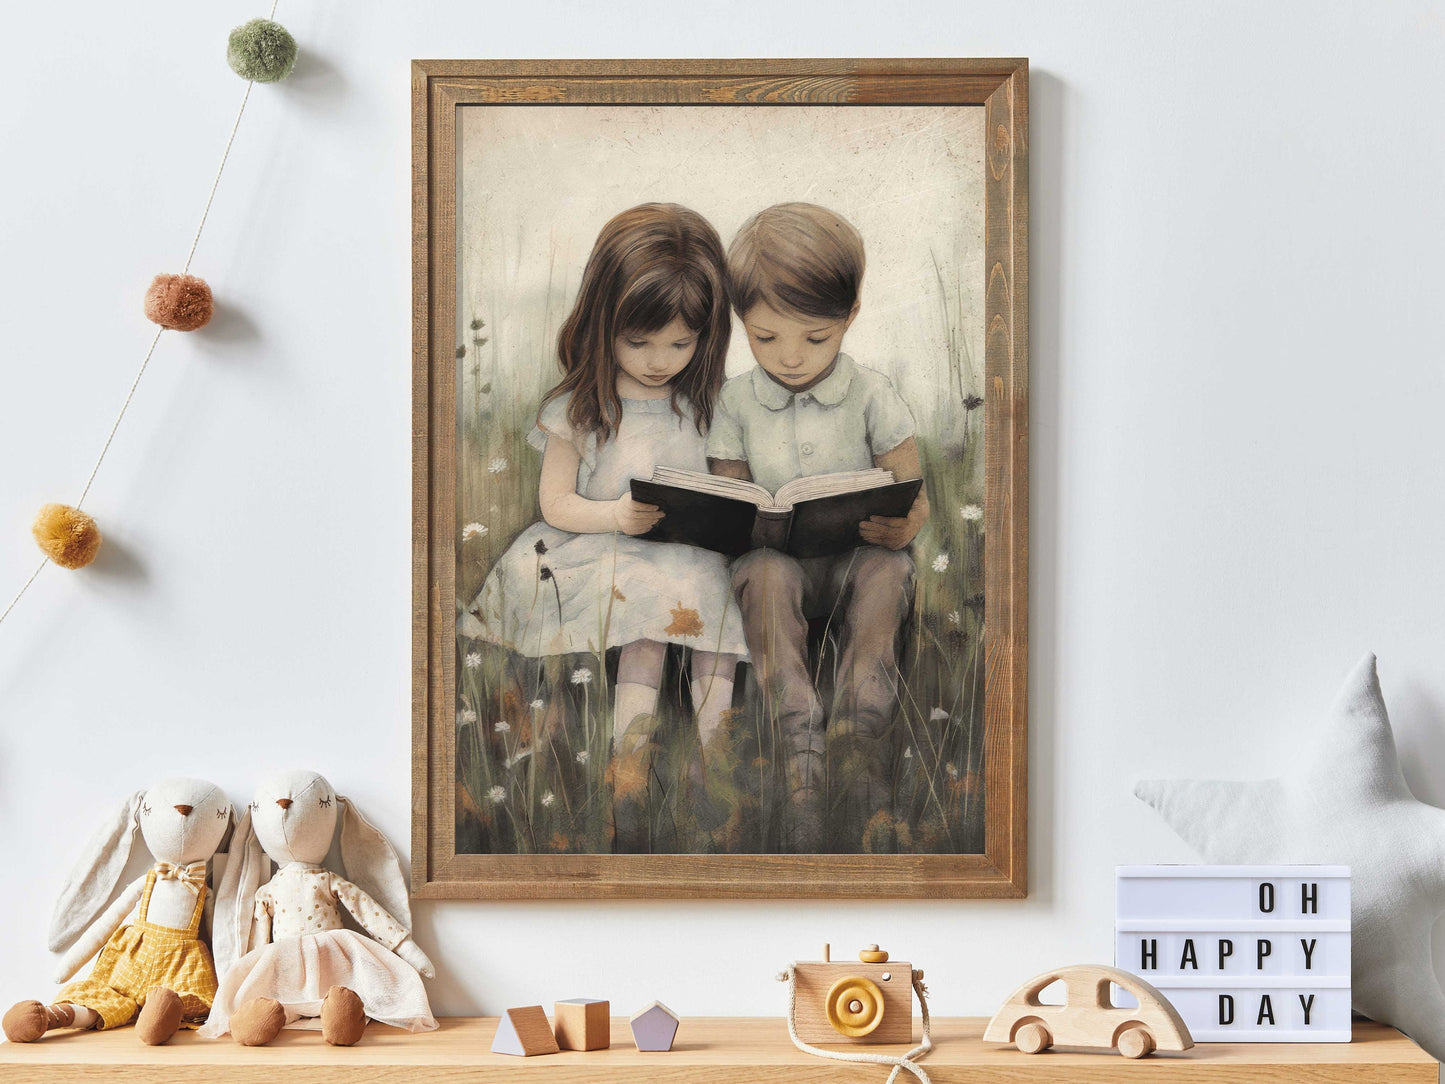 Read Decor for Kids, Sibling Print, Brother and Sister Wall Decor, Toddler Room Decor, Encourage Reading & Learning, Digital Printable Art